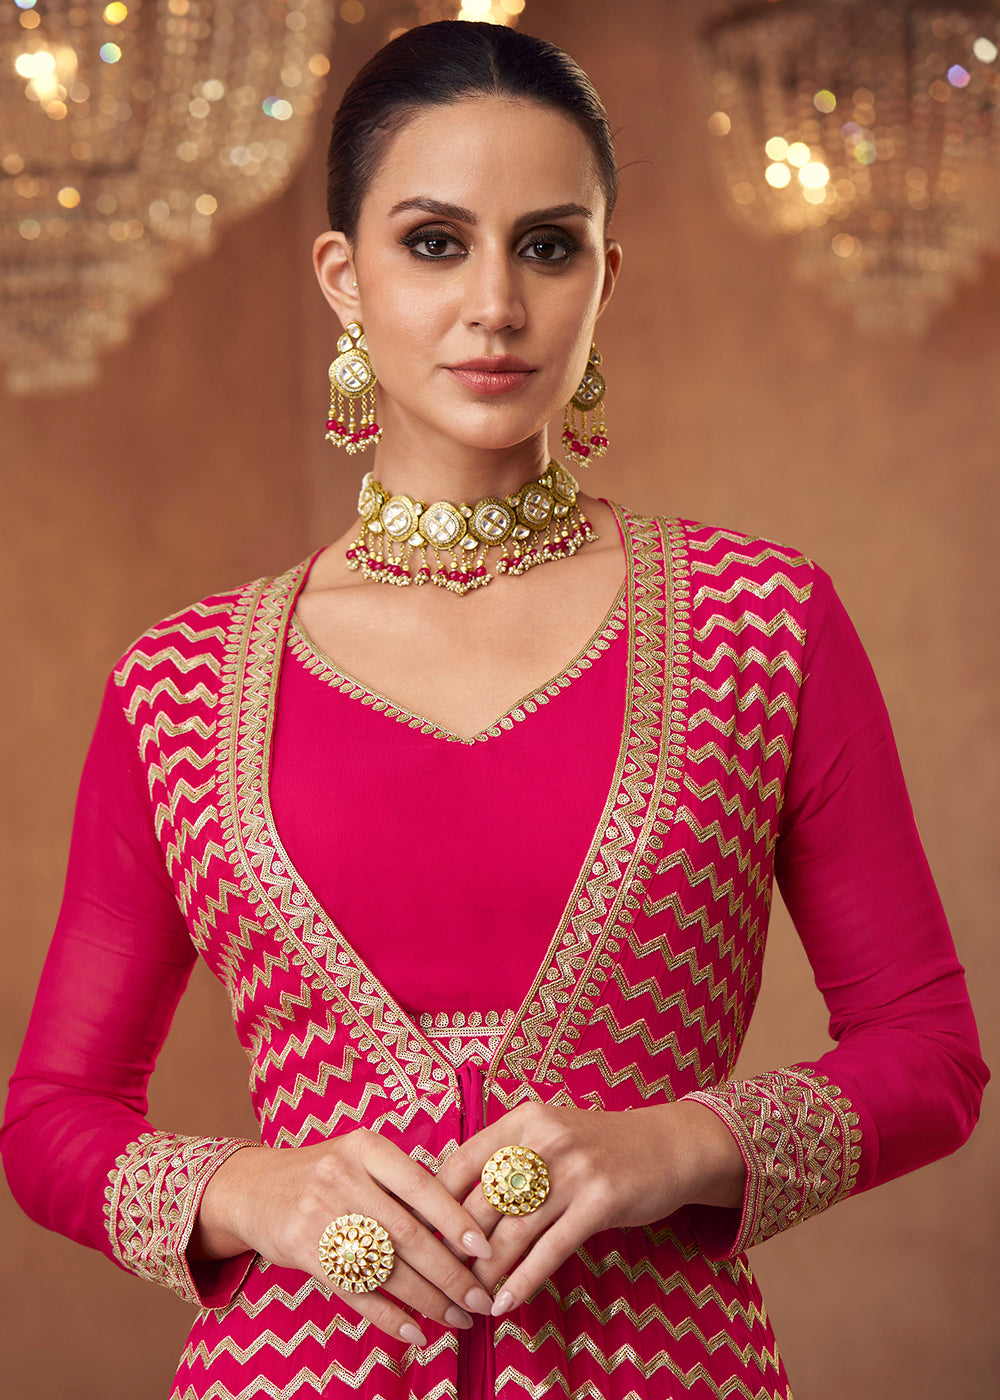 Shop Now Hot Pink Crop Top Style Georgette Lehenga Skirt Suit Online in USA, UK, Canada & Worldwide at Empress Clothing. 